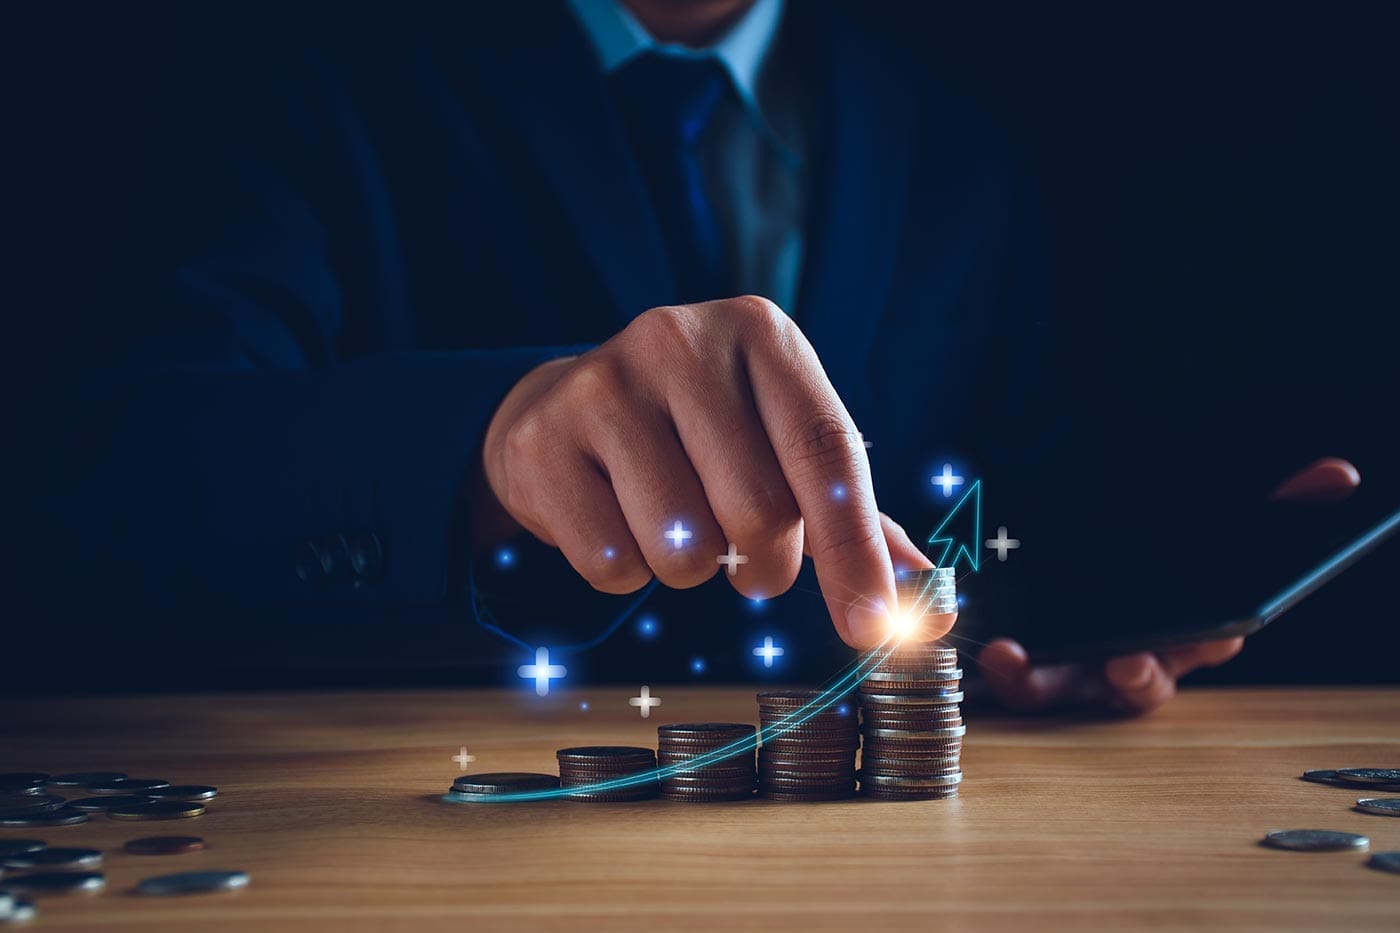 Man in suit stacking coins trading growth concept art for investment